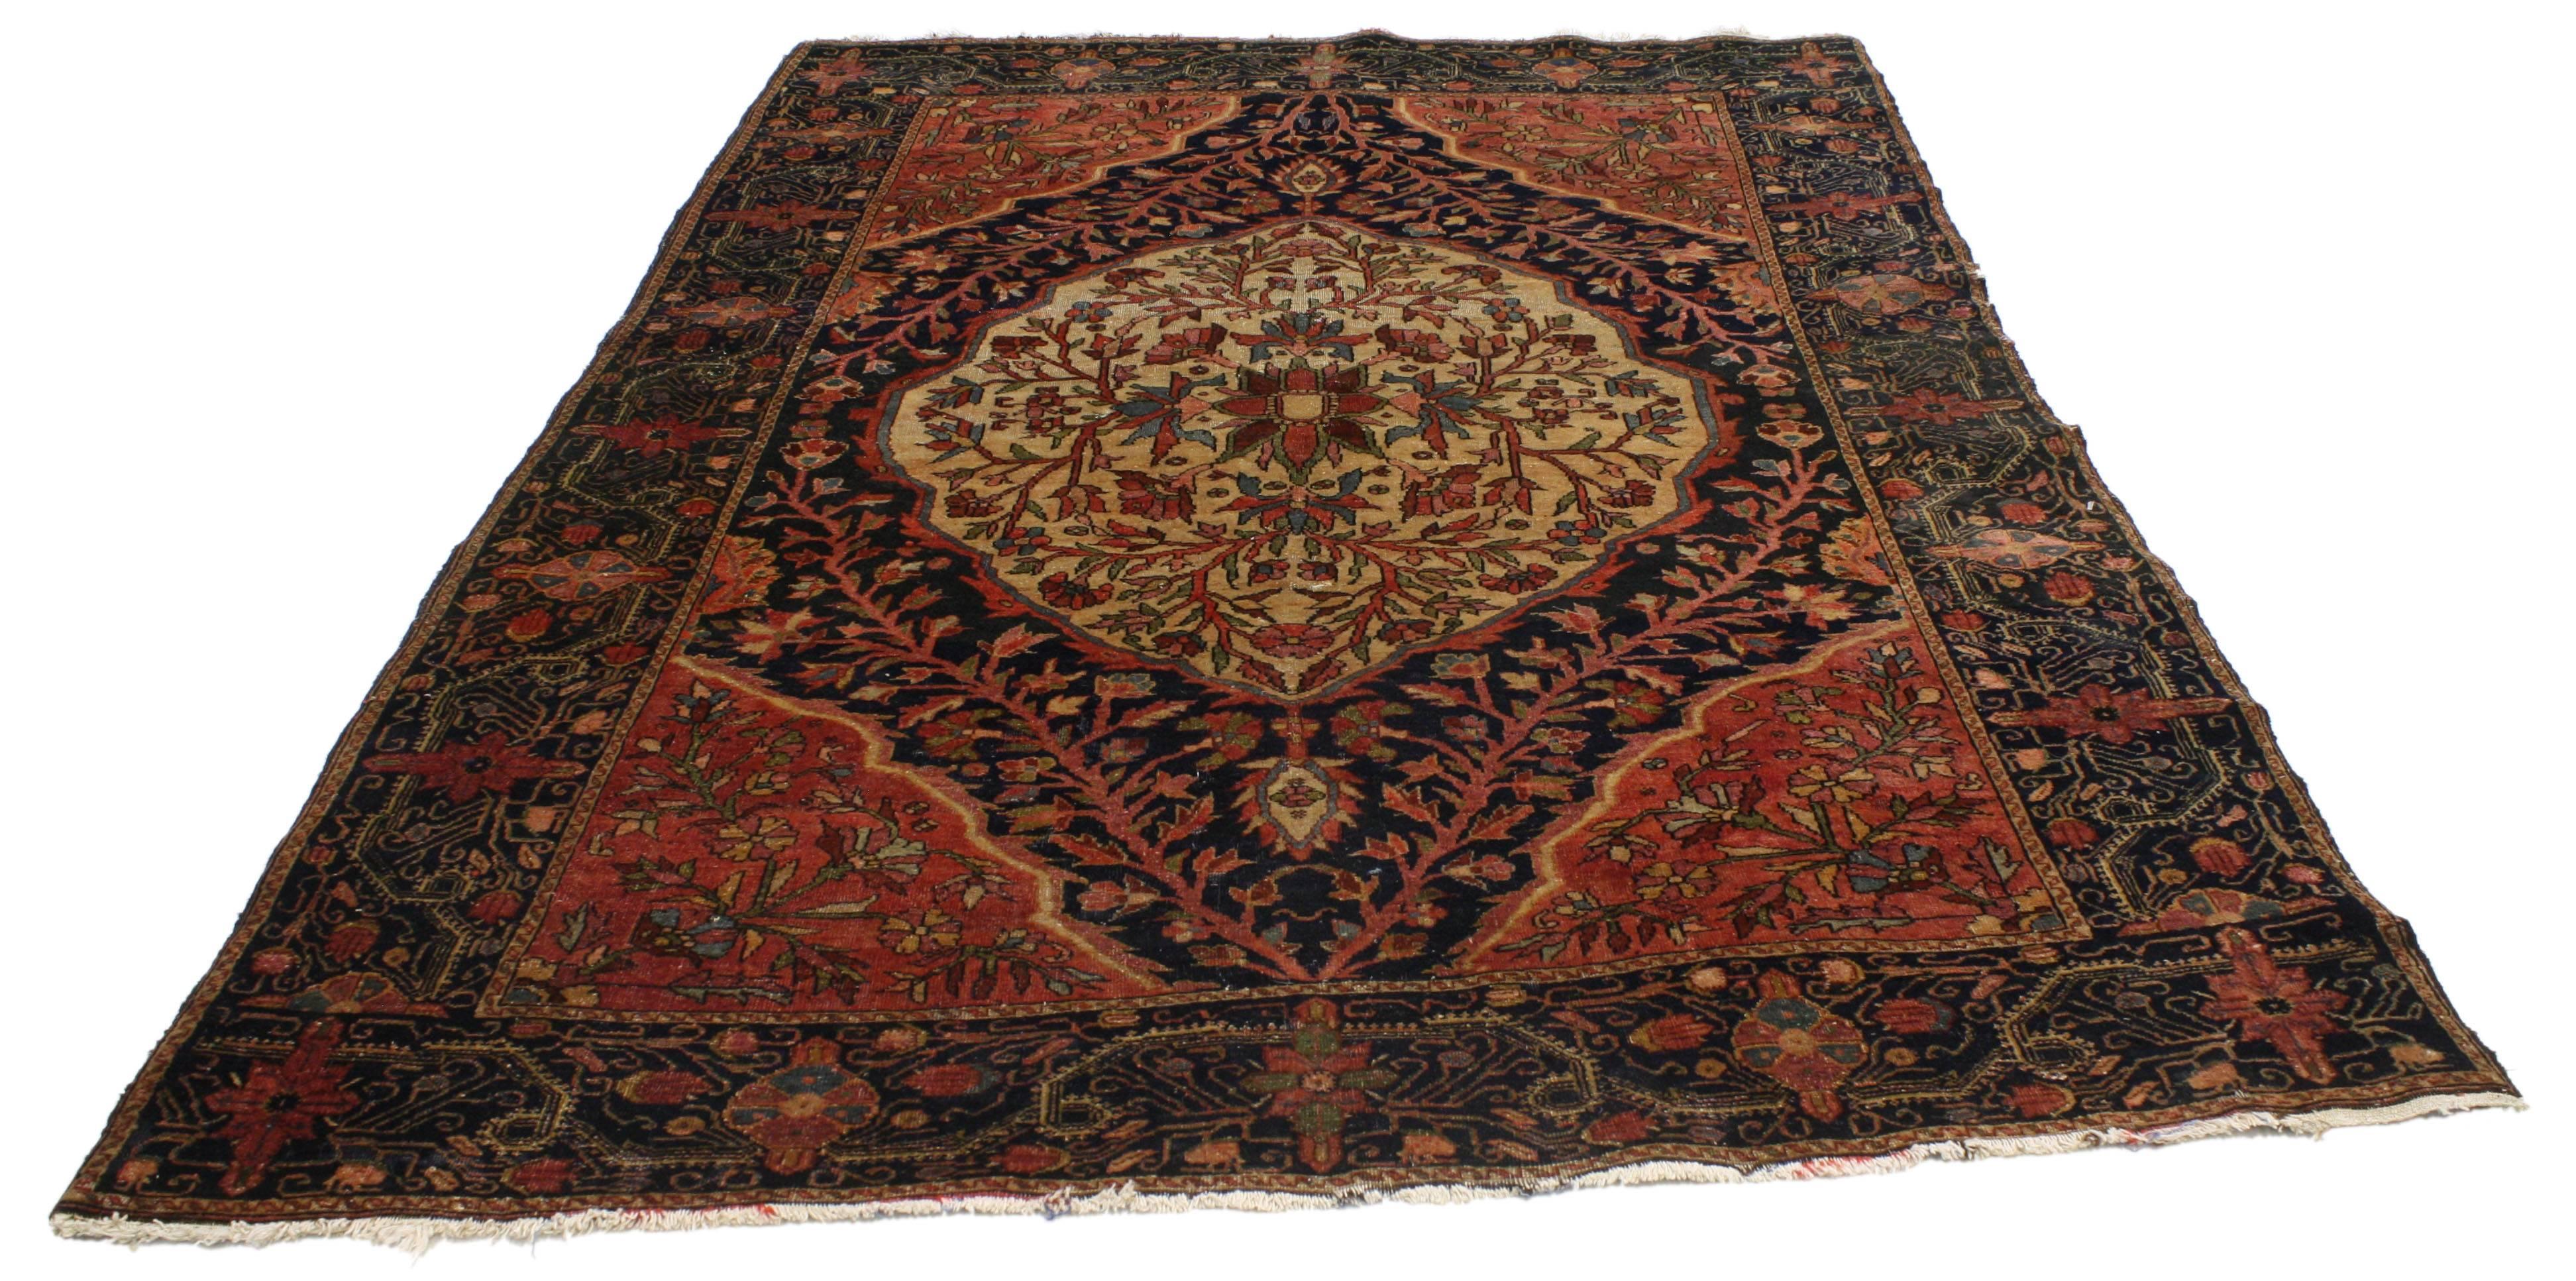 This highly desirable antique Persian Farahan rug with modern traditional style features an intricate center medallion in a navy blue field surrounded by red quarter panels. Rendered in a refined palette illuminating the lively, composition of this